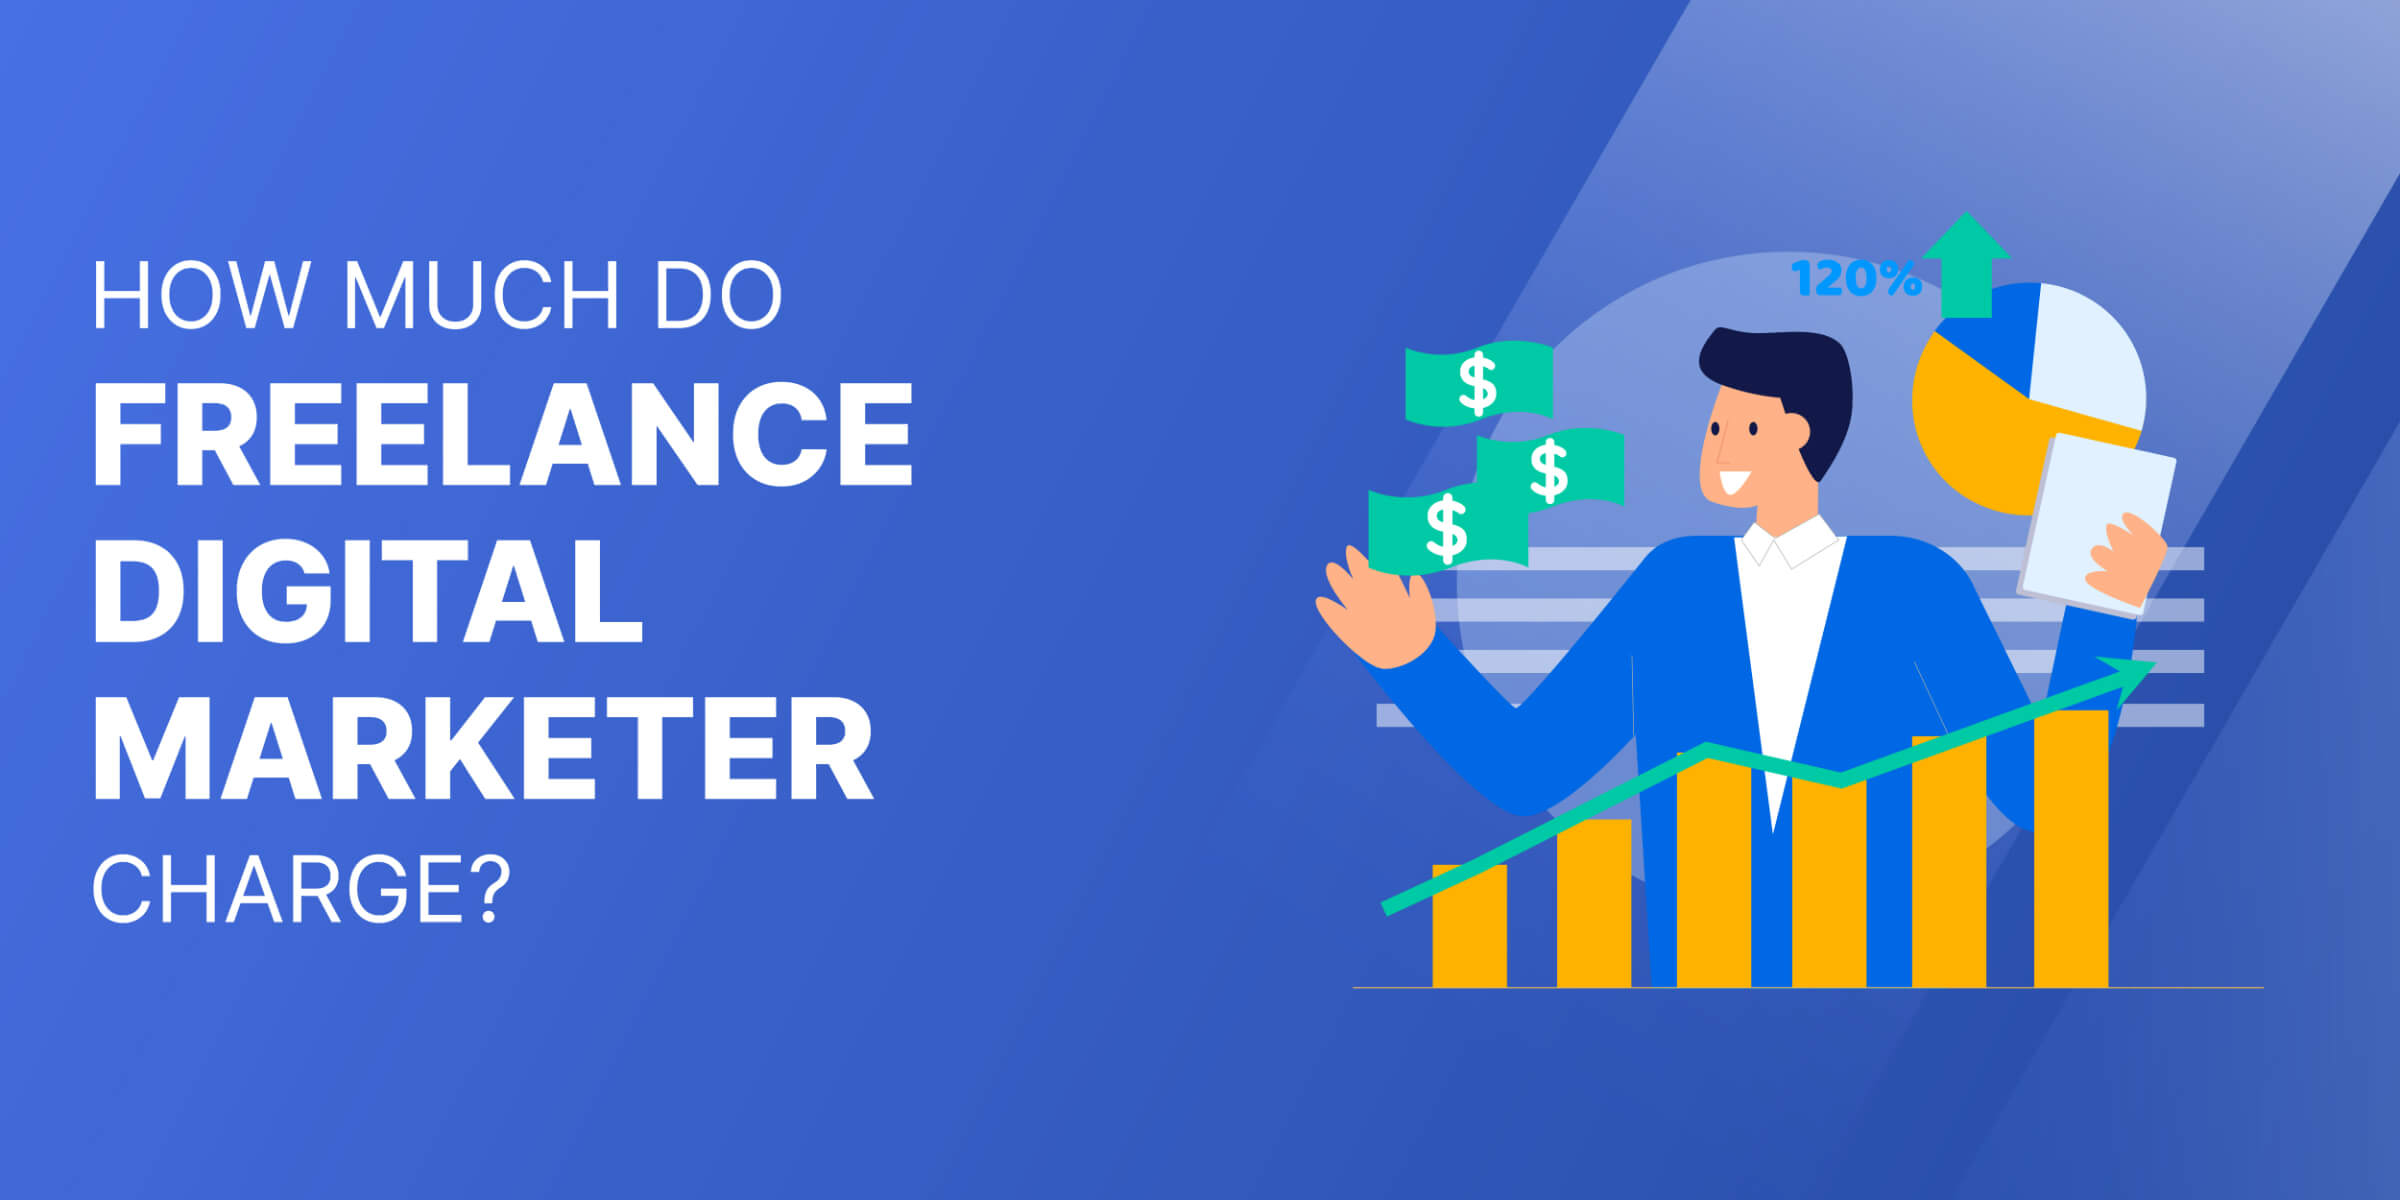 How Much Do Freelance Digital Marketers Charge